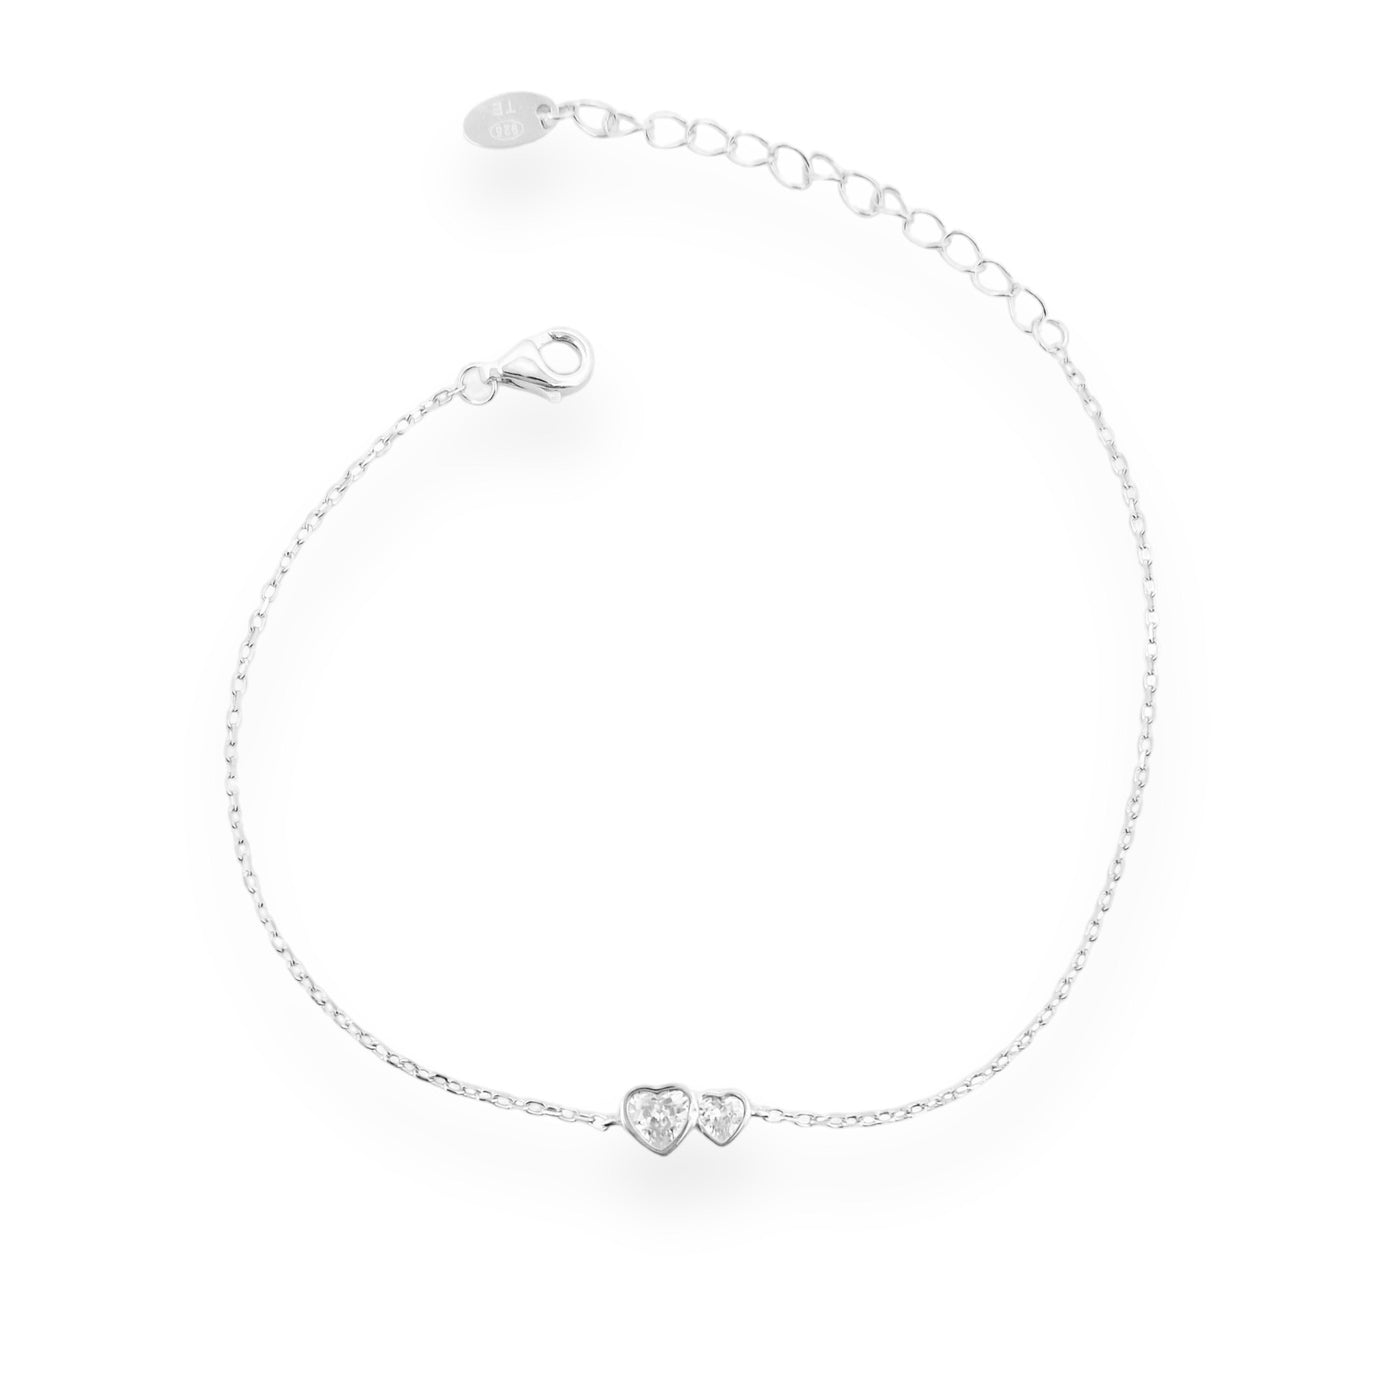 SILVER BRACELET WITH 2 HEARTS